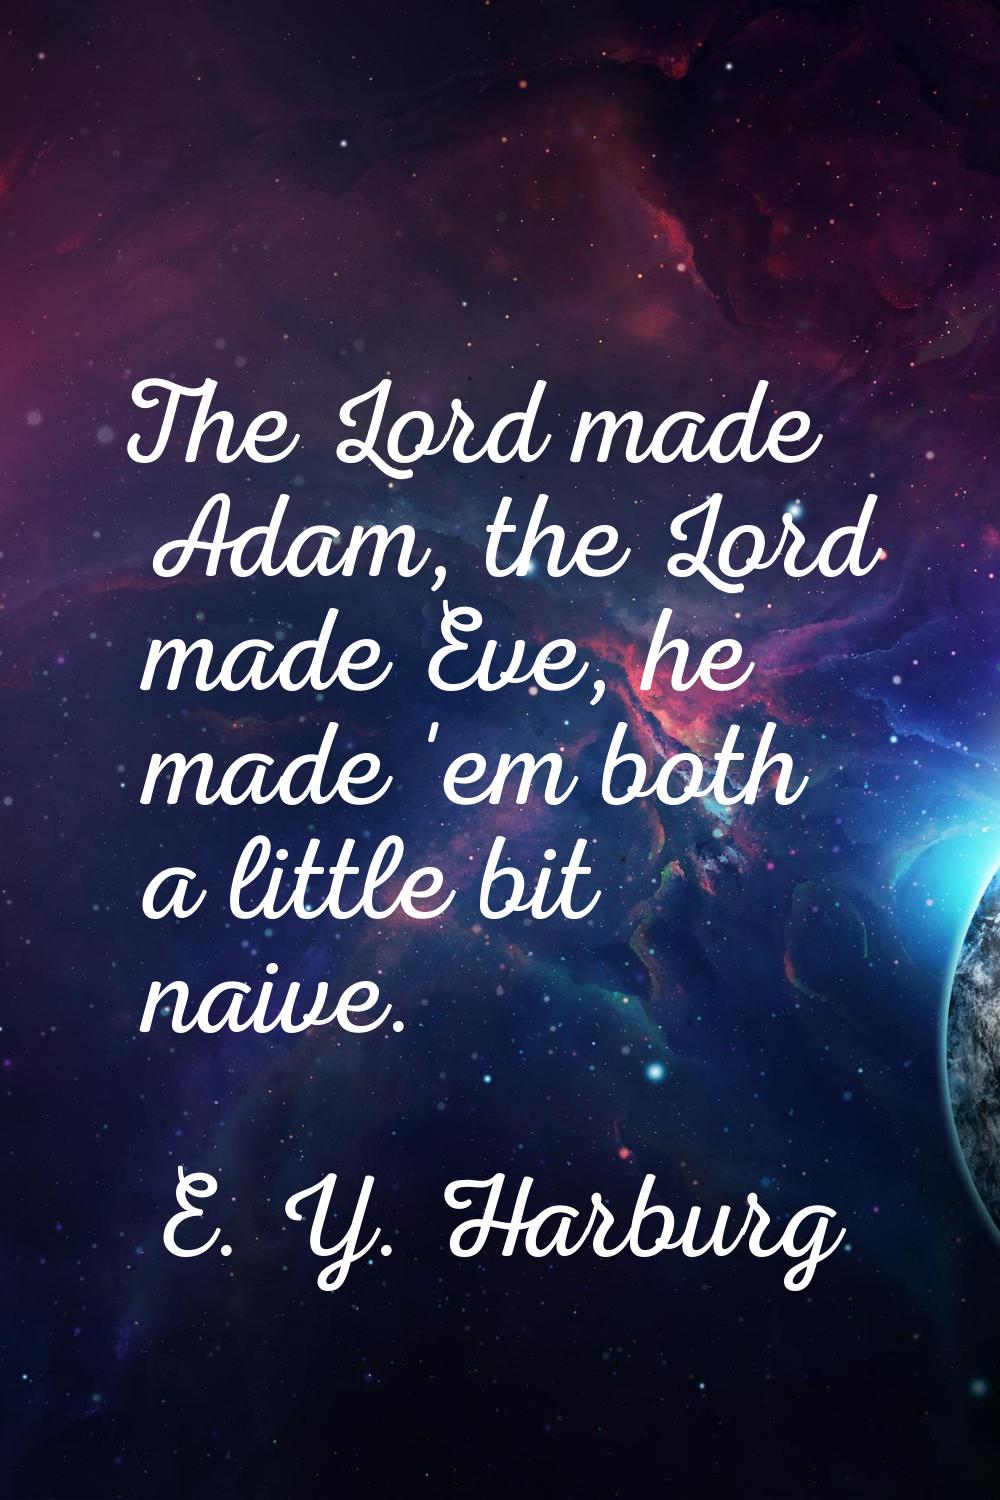 The Lord made Adam, the Lord made Eve, he made 'em both a little bit naive.